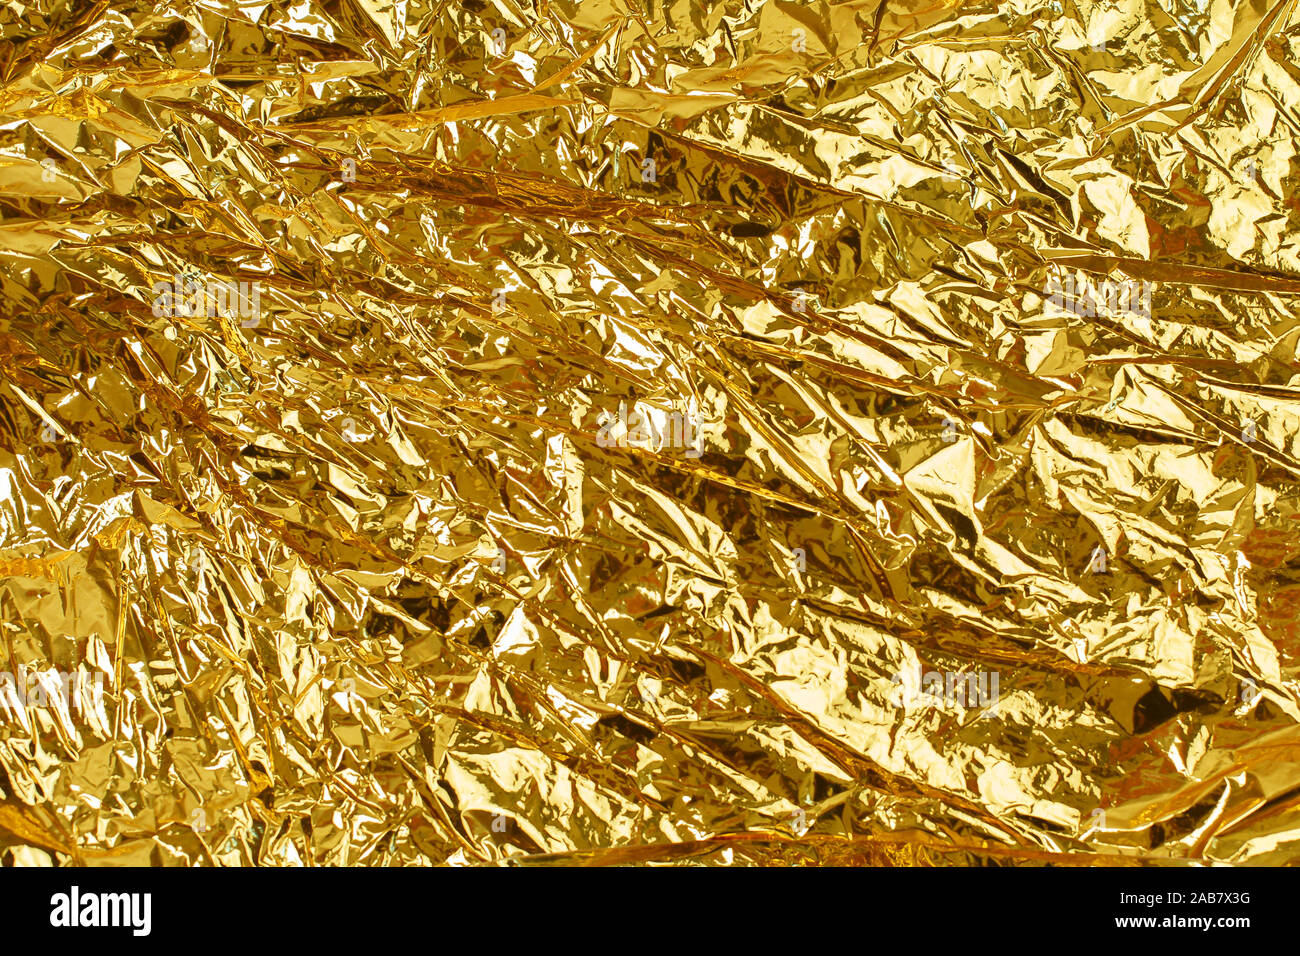 Gold leaf background texture with shiny crumpled uneven surface. Golden foil  crumpled background texture Stock Photo - Alamy